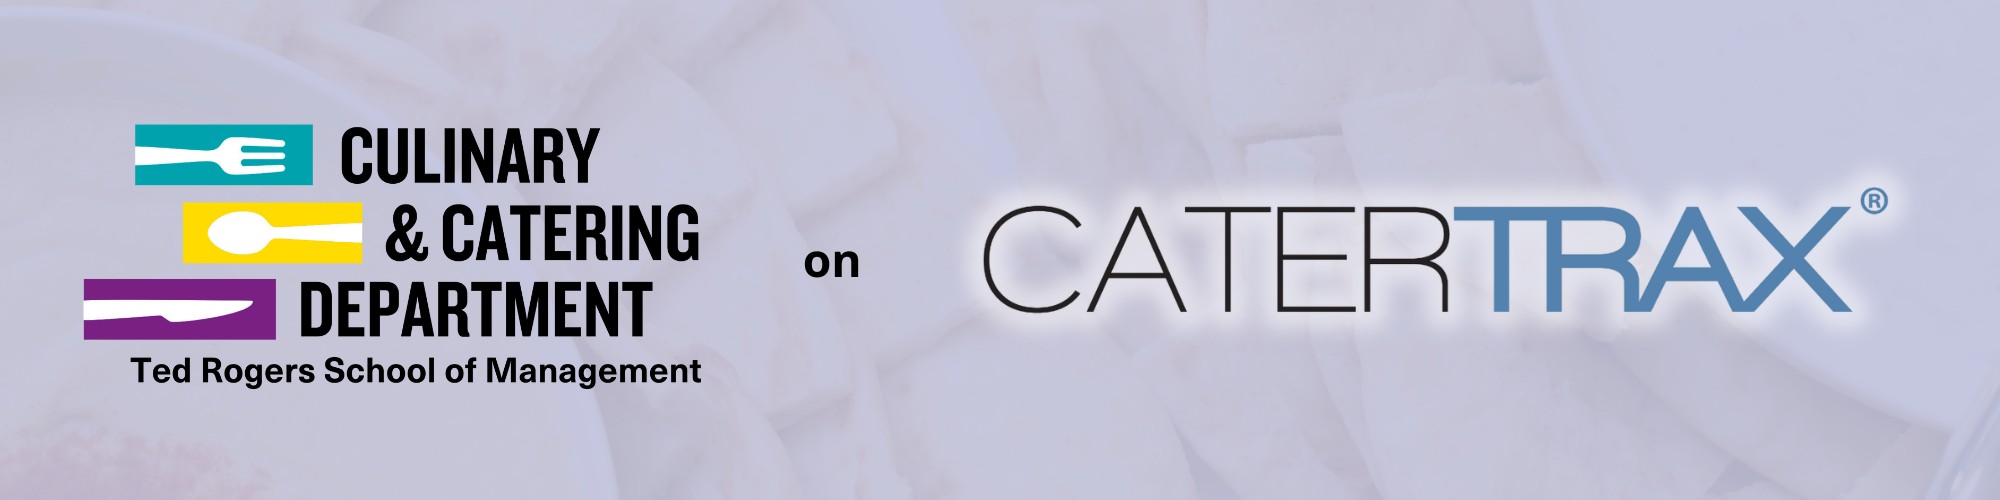 Culinary and Catertrax Logos